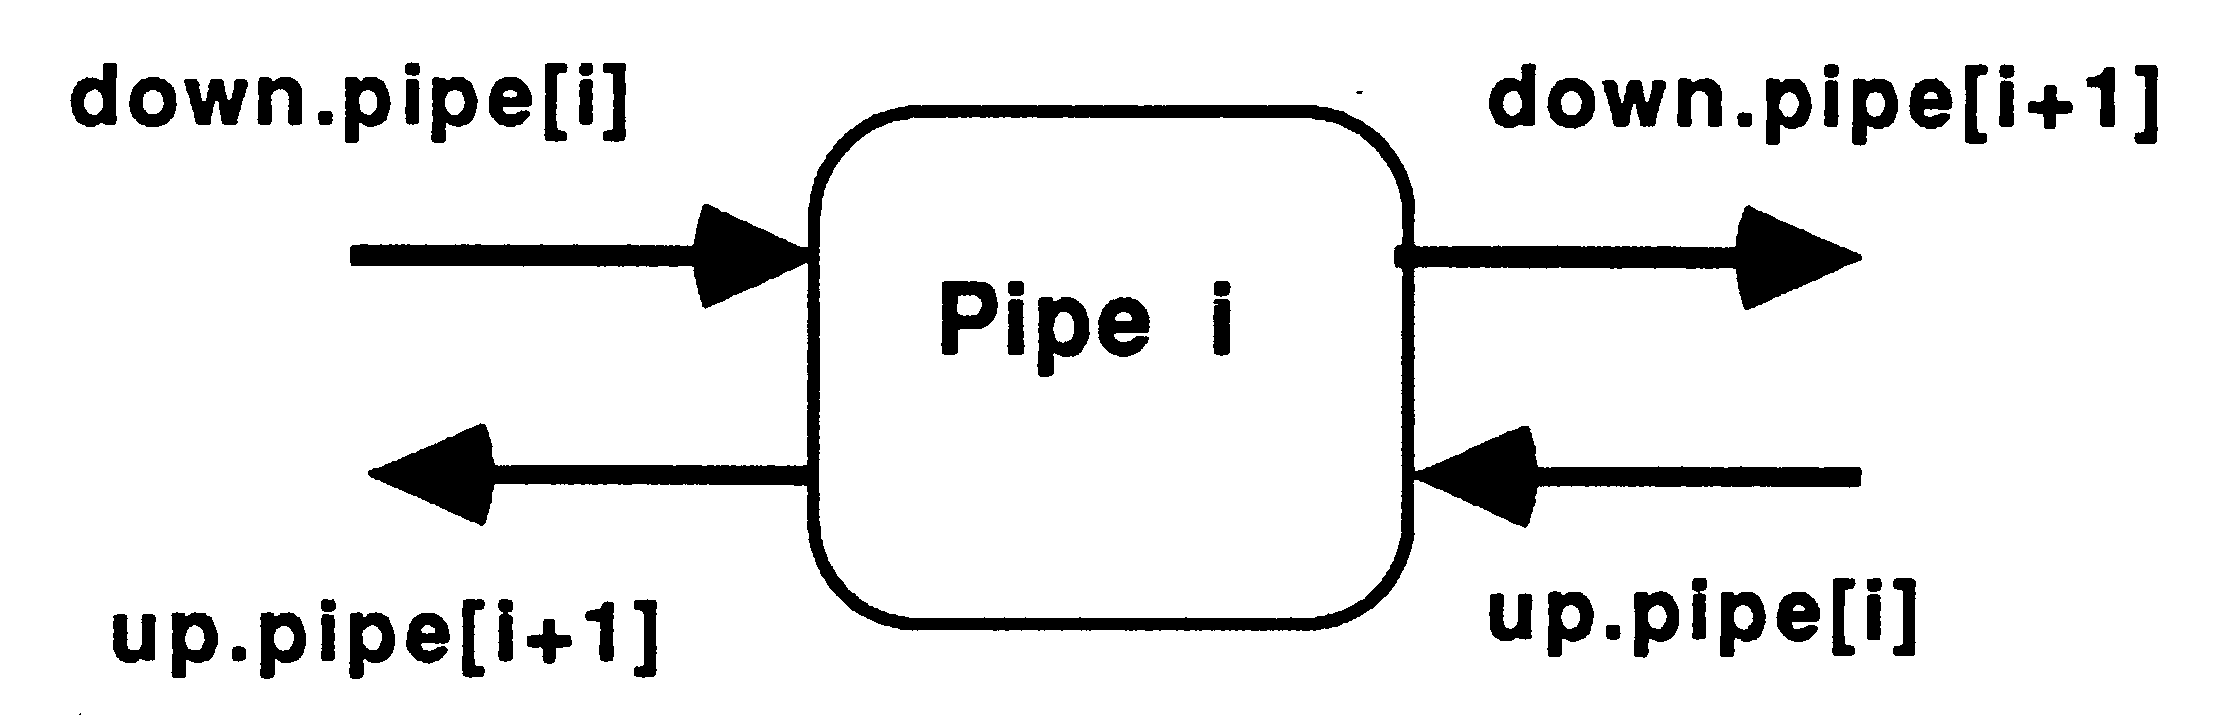 A node in the pipeline